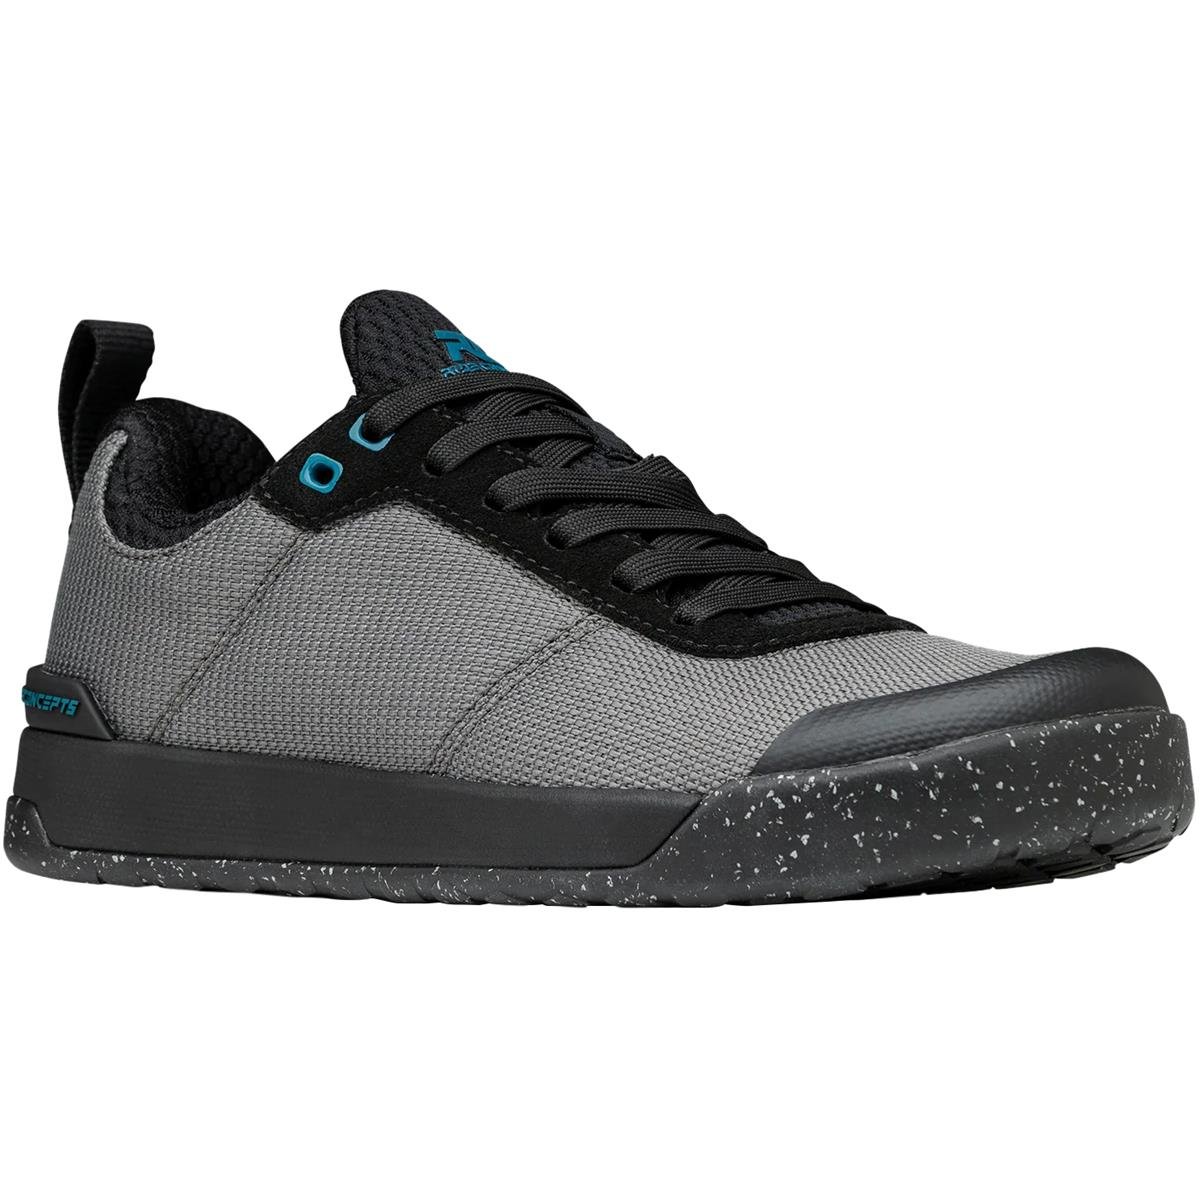 Ride Concepts Femme Chaussures VTT Accomplice Clip Charcoal/Tahoe Blue